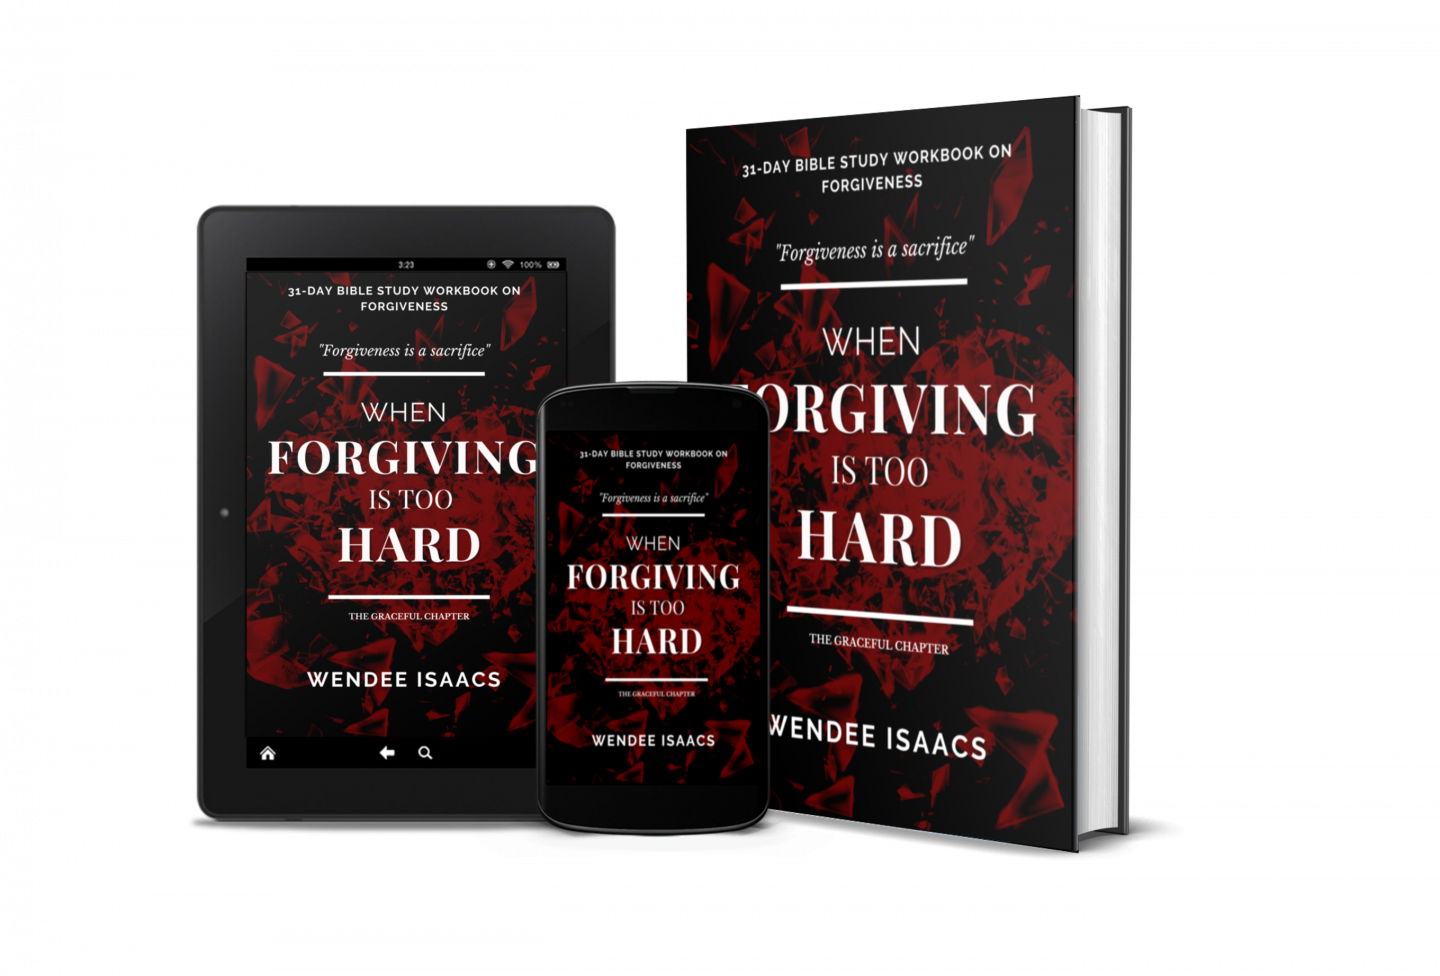 When Forgiving Is Too Hard - 31-Day Forgiveness Bible Study Workbook